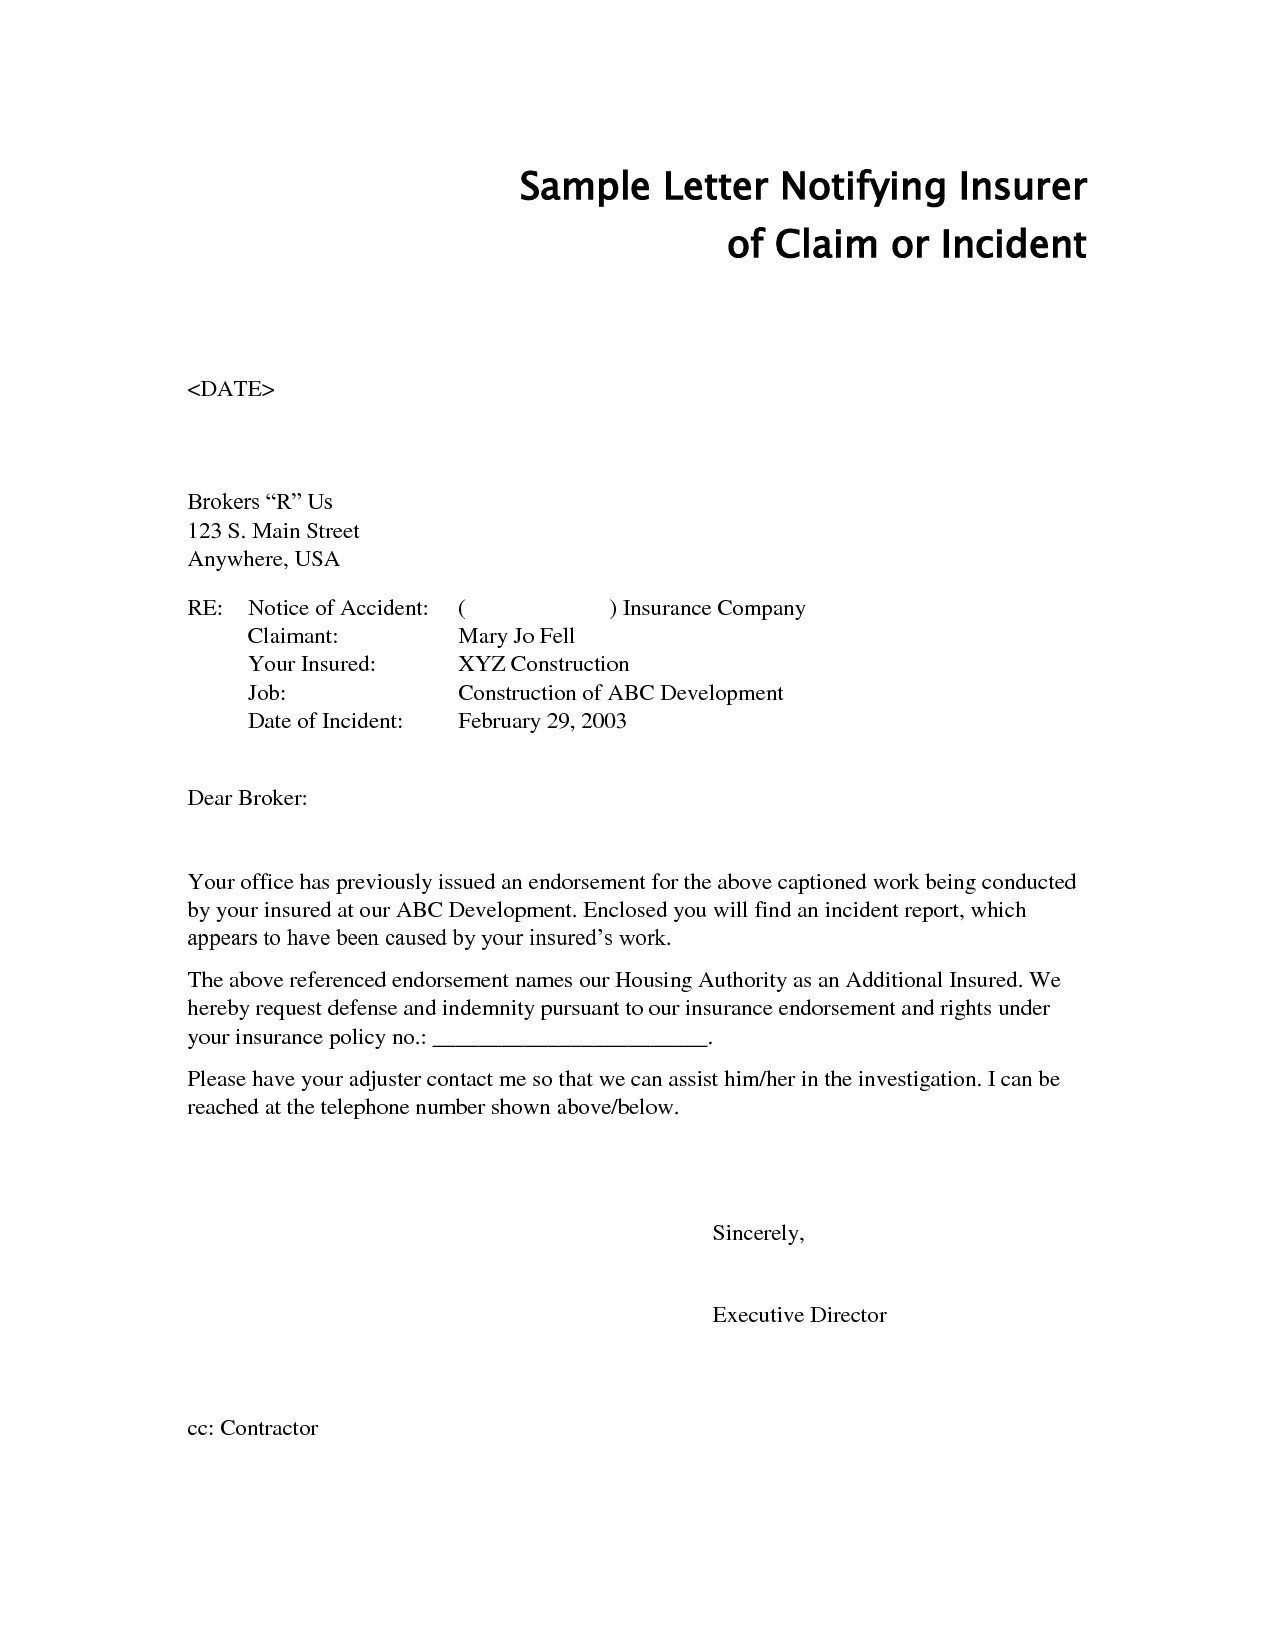 Subrogation Demand Letter Template - Request for Fund Transfer Letter Template Mobile Insurance Claim